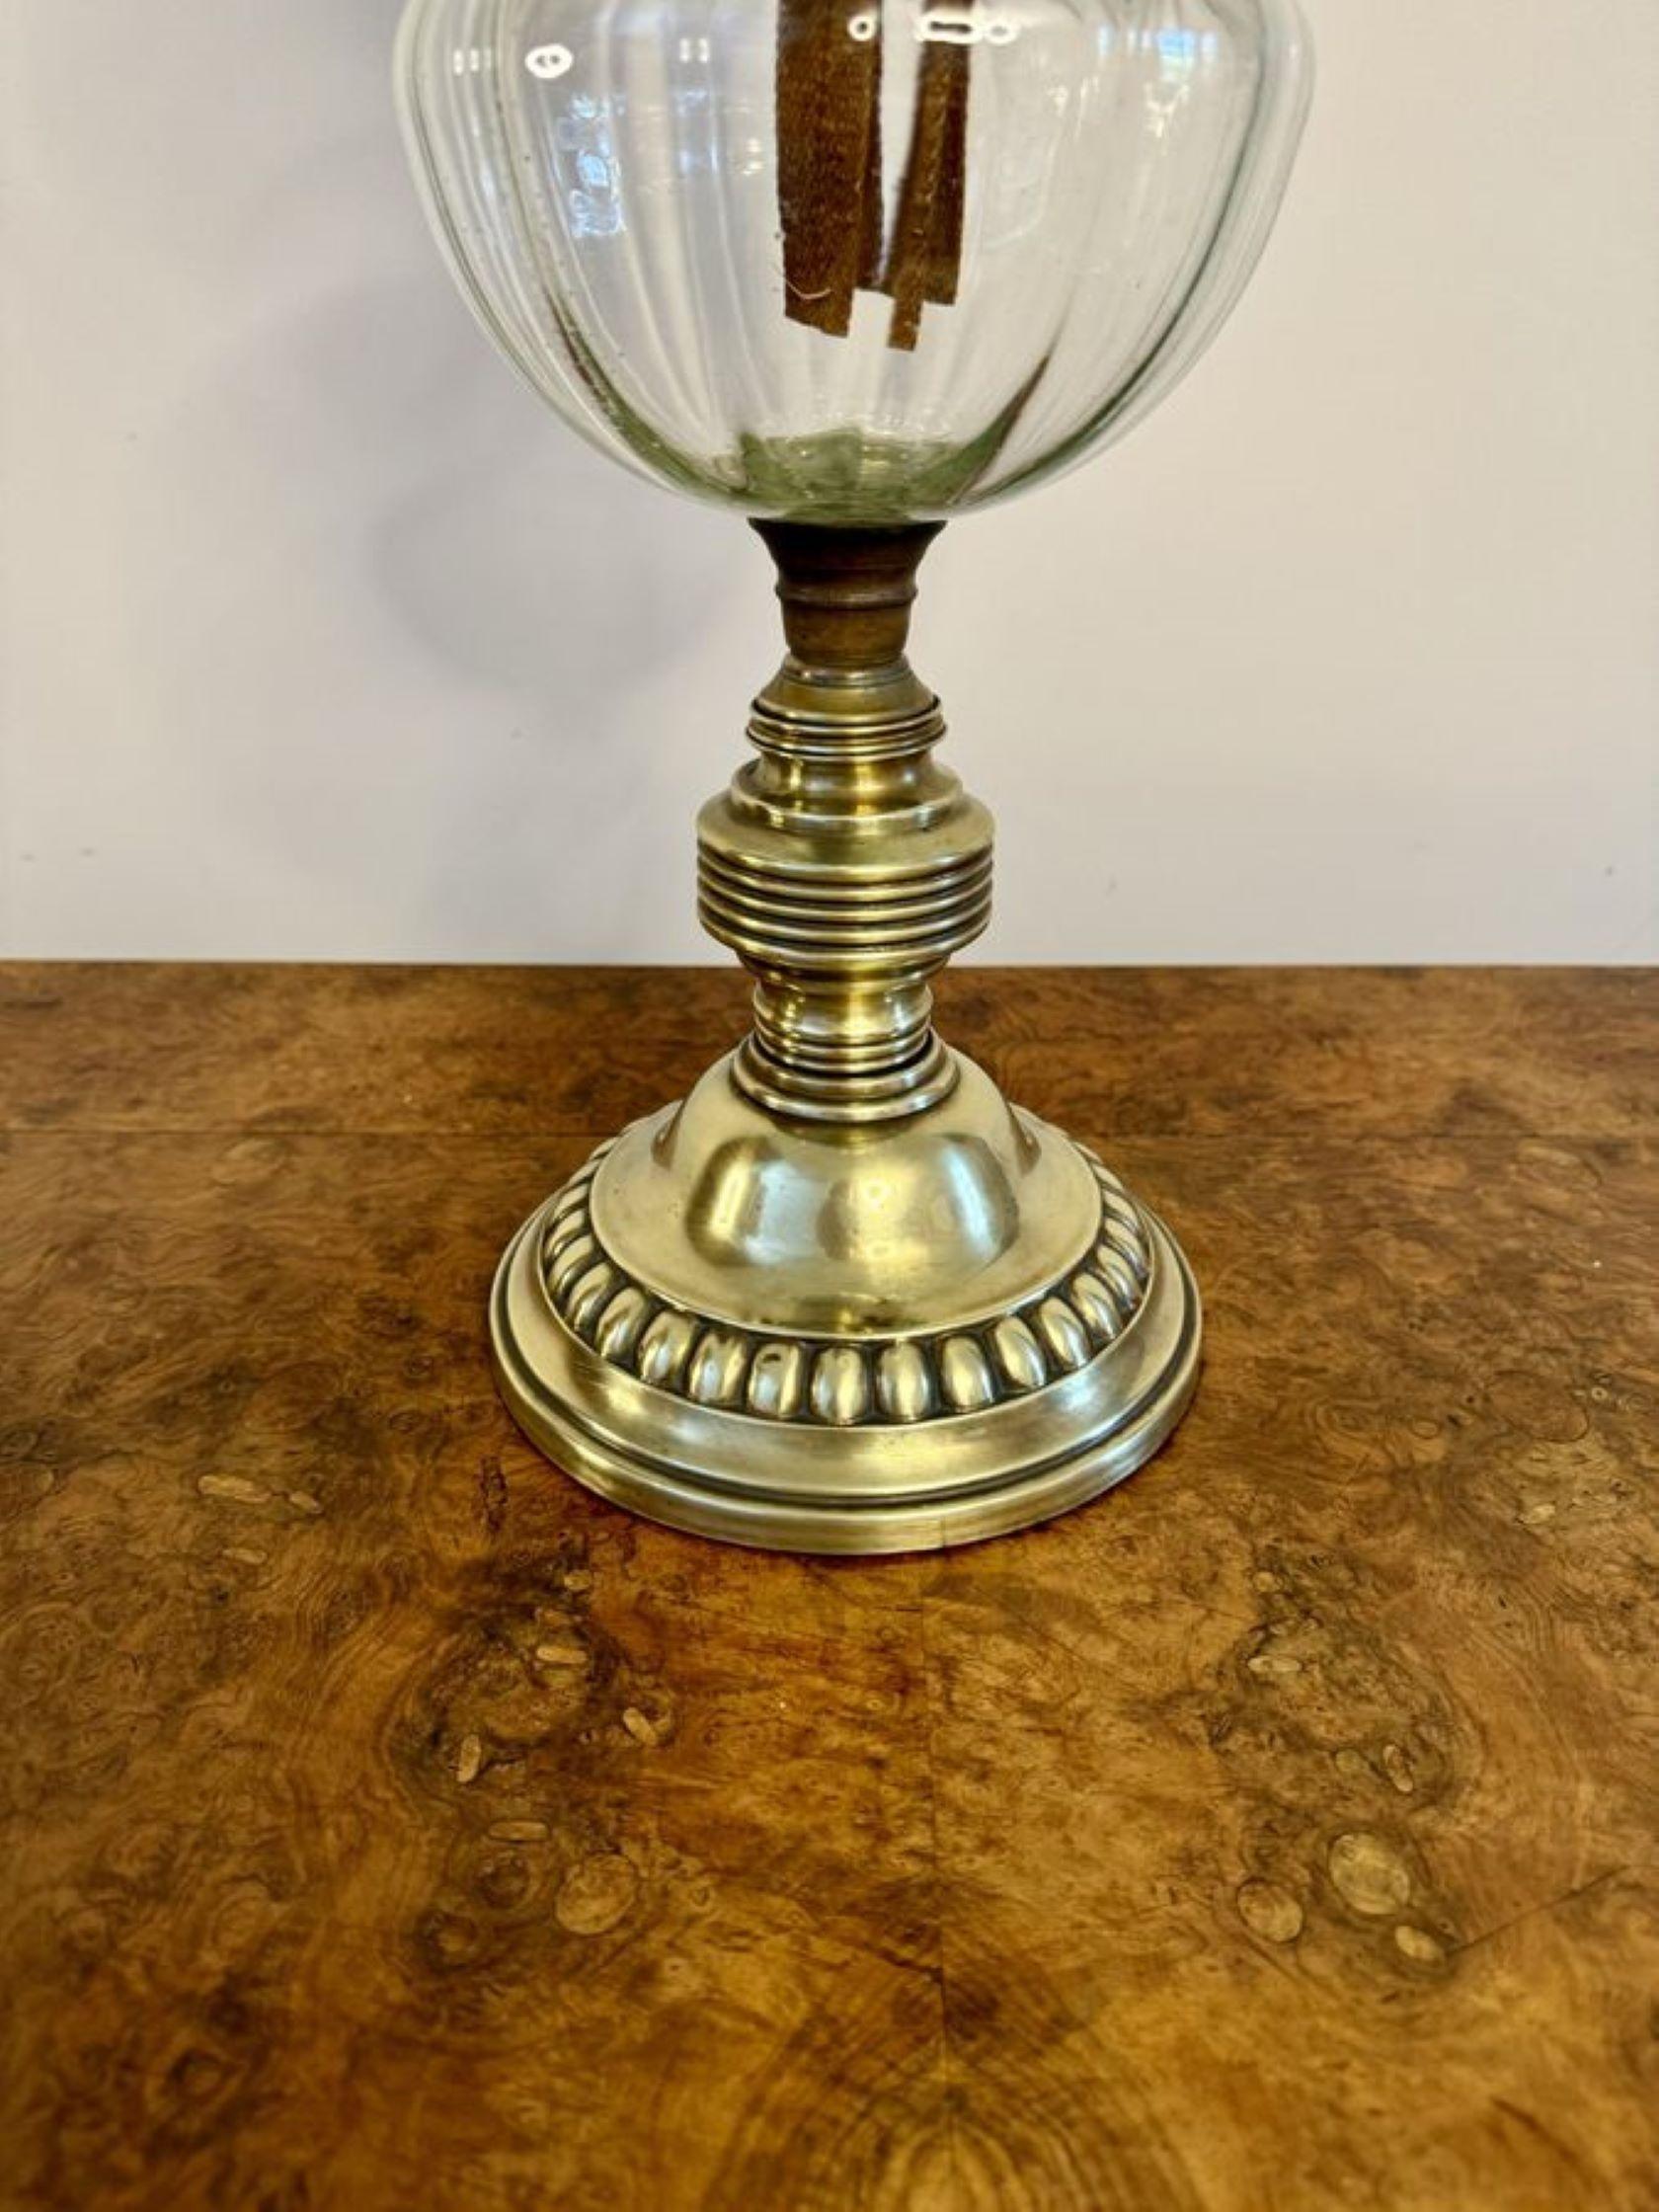 Quality antique Victorian brass oil lamp, having a quality antique Victorian brass oil lamp with an etched glass globe and a glass chimney above a double brass burner and clear glass reservoir, raised on a brass column with a circular ornate brass